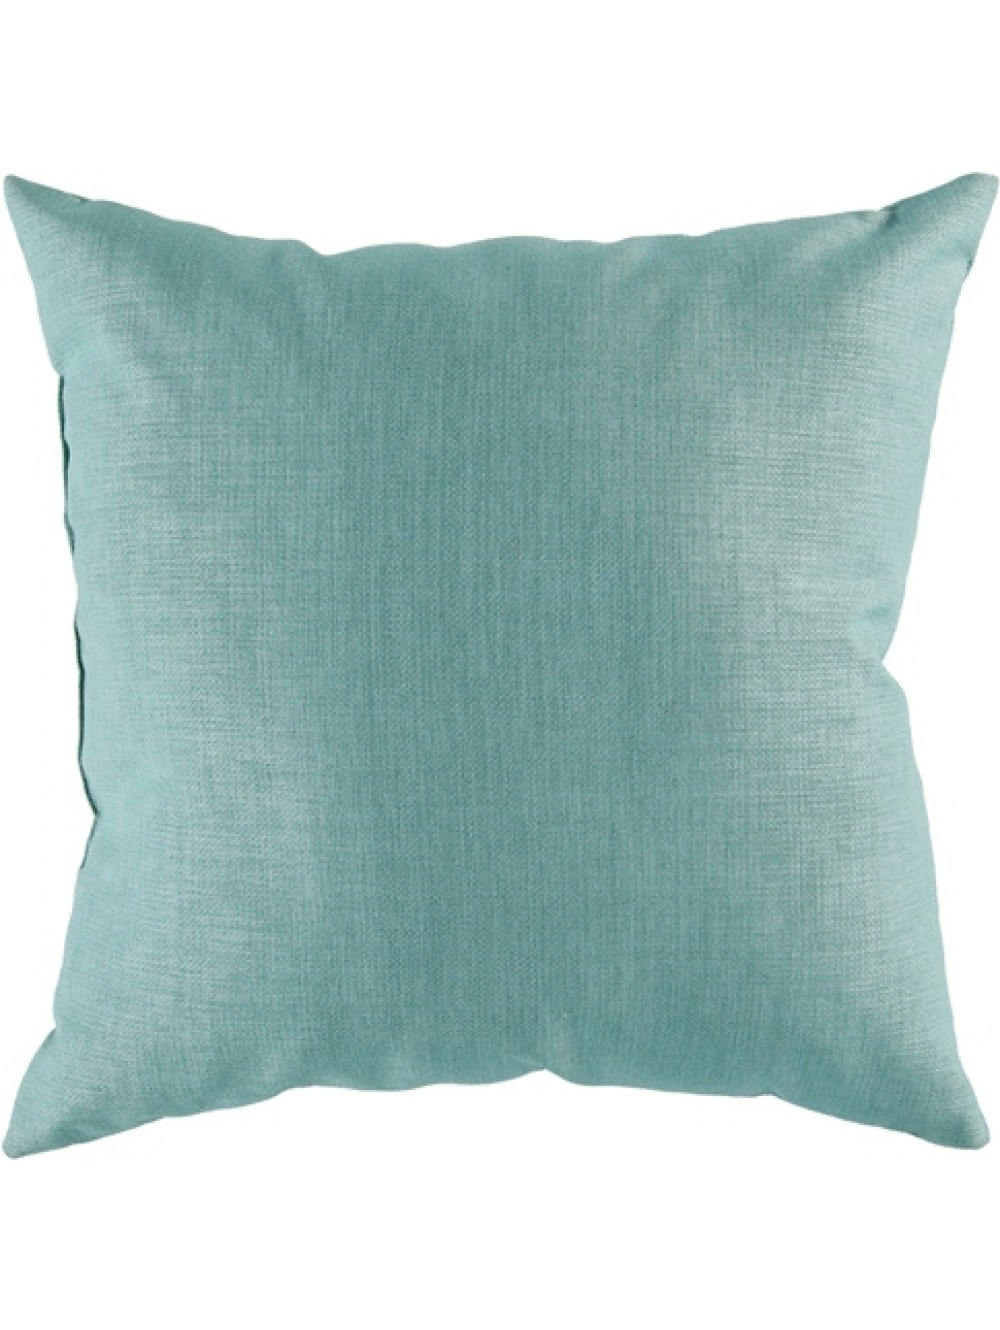 MOSELLE INDOOR/OUTDOOR PILLOW, TEAL - 13" x 20" - Down Insert - Image 1